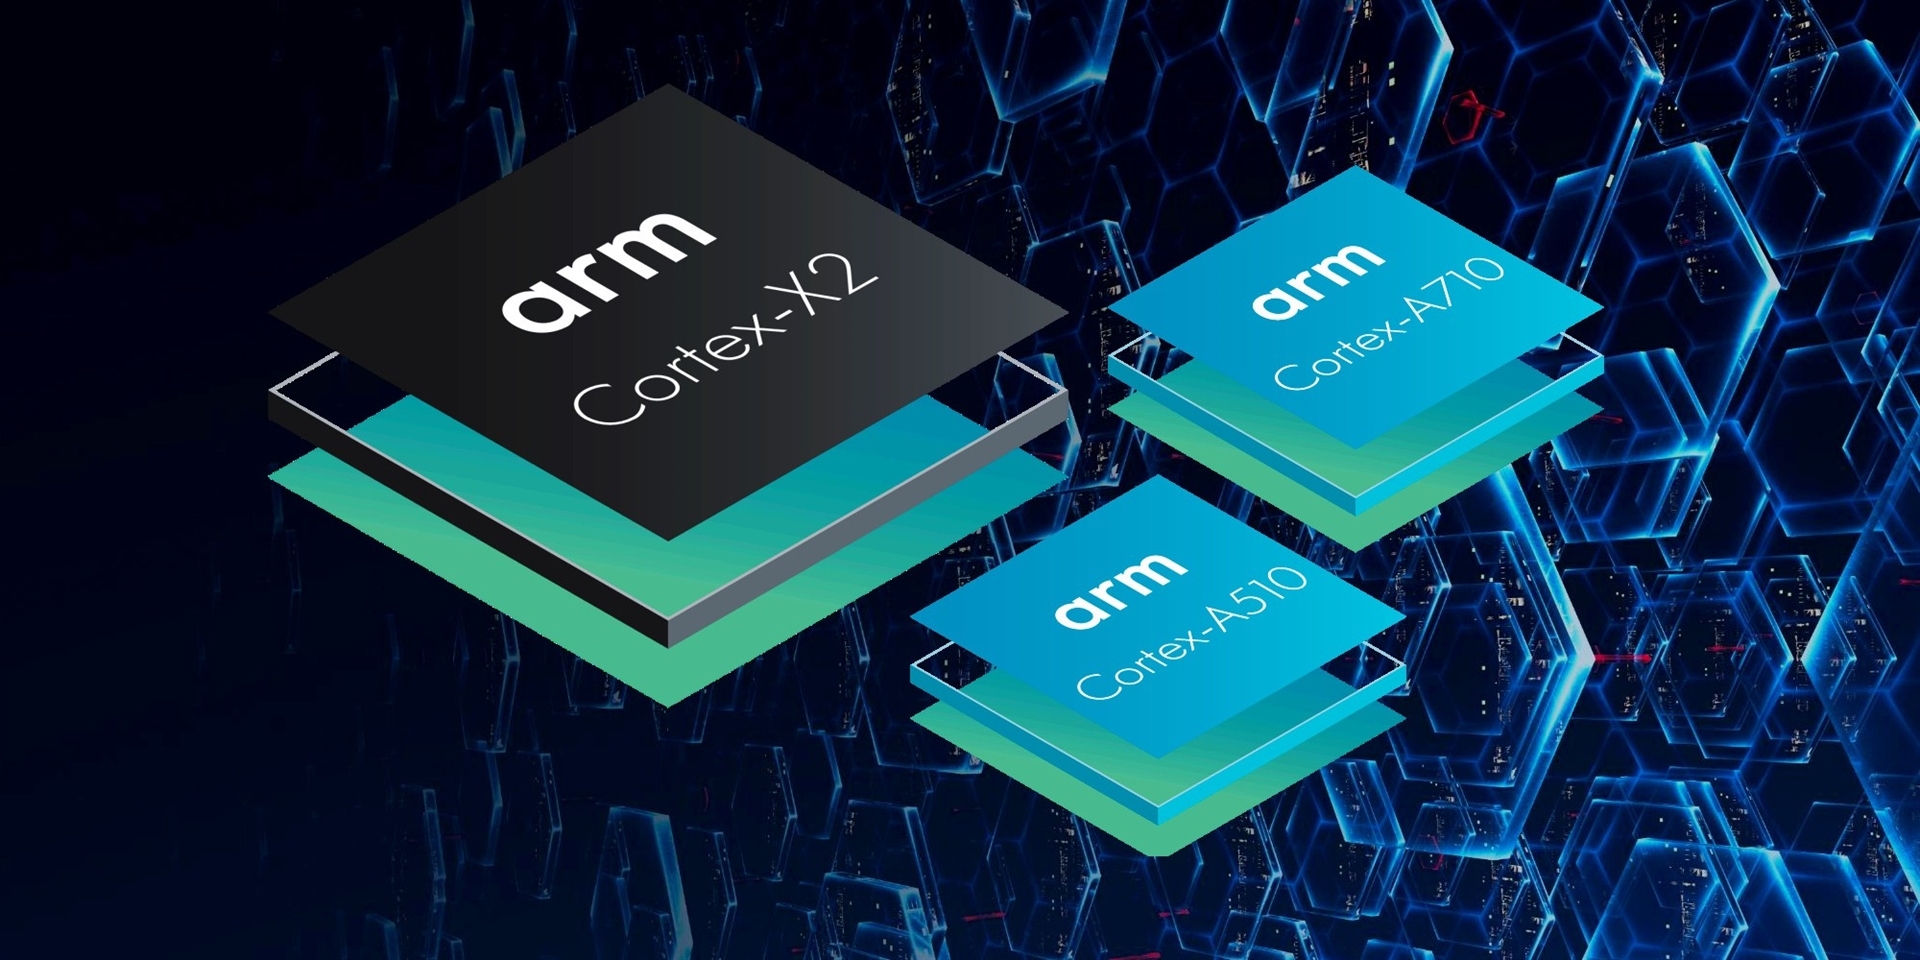 You’ll find this in cell phones and computers next year.  Arm showed more powerful processors and graphics – Živě.cz